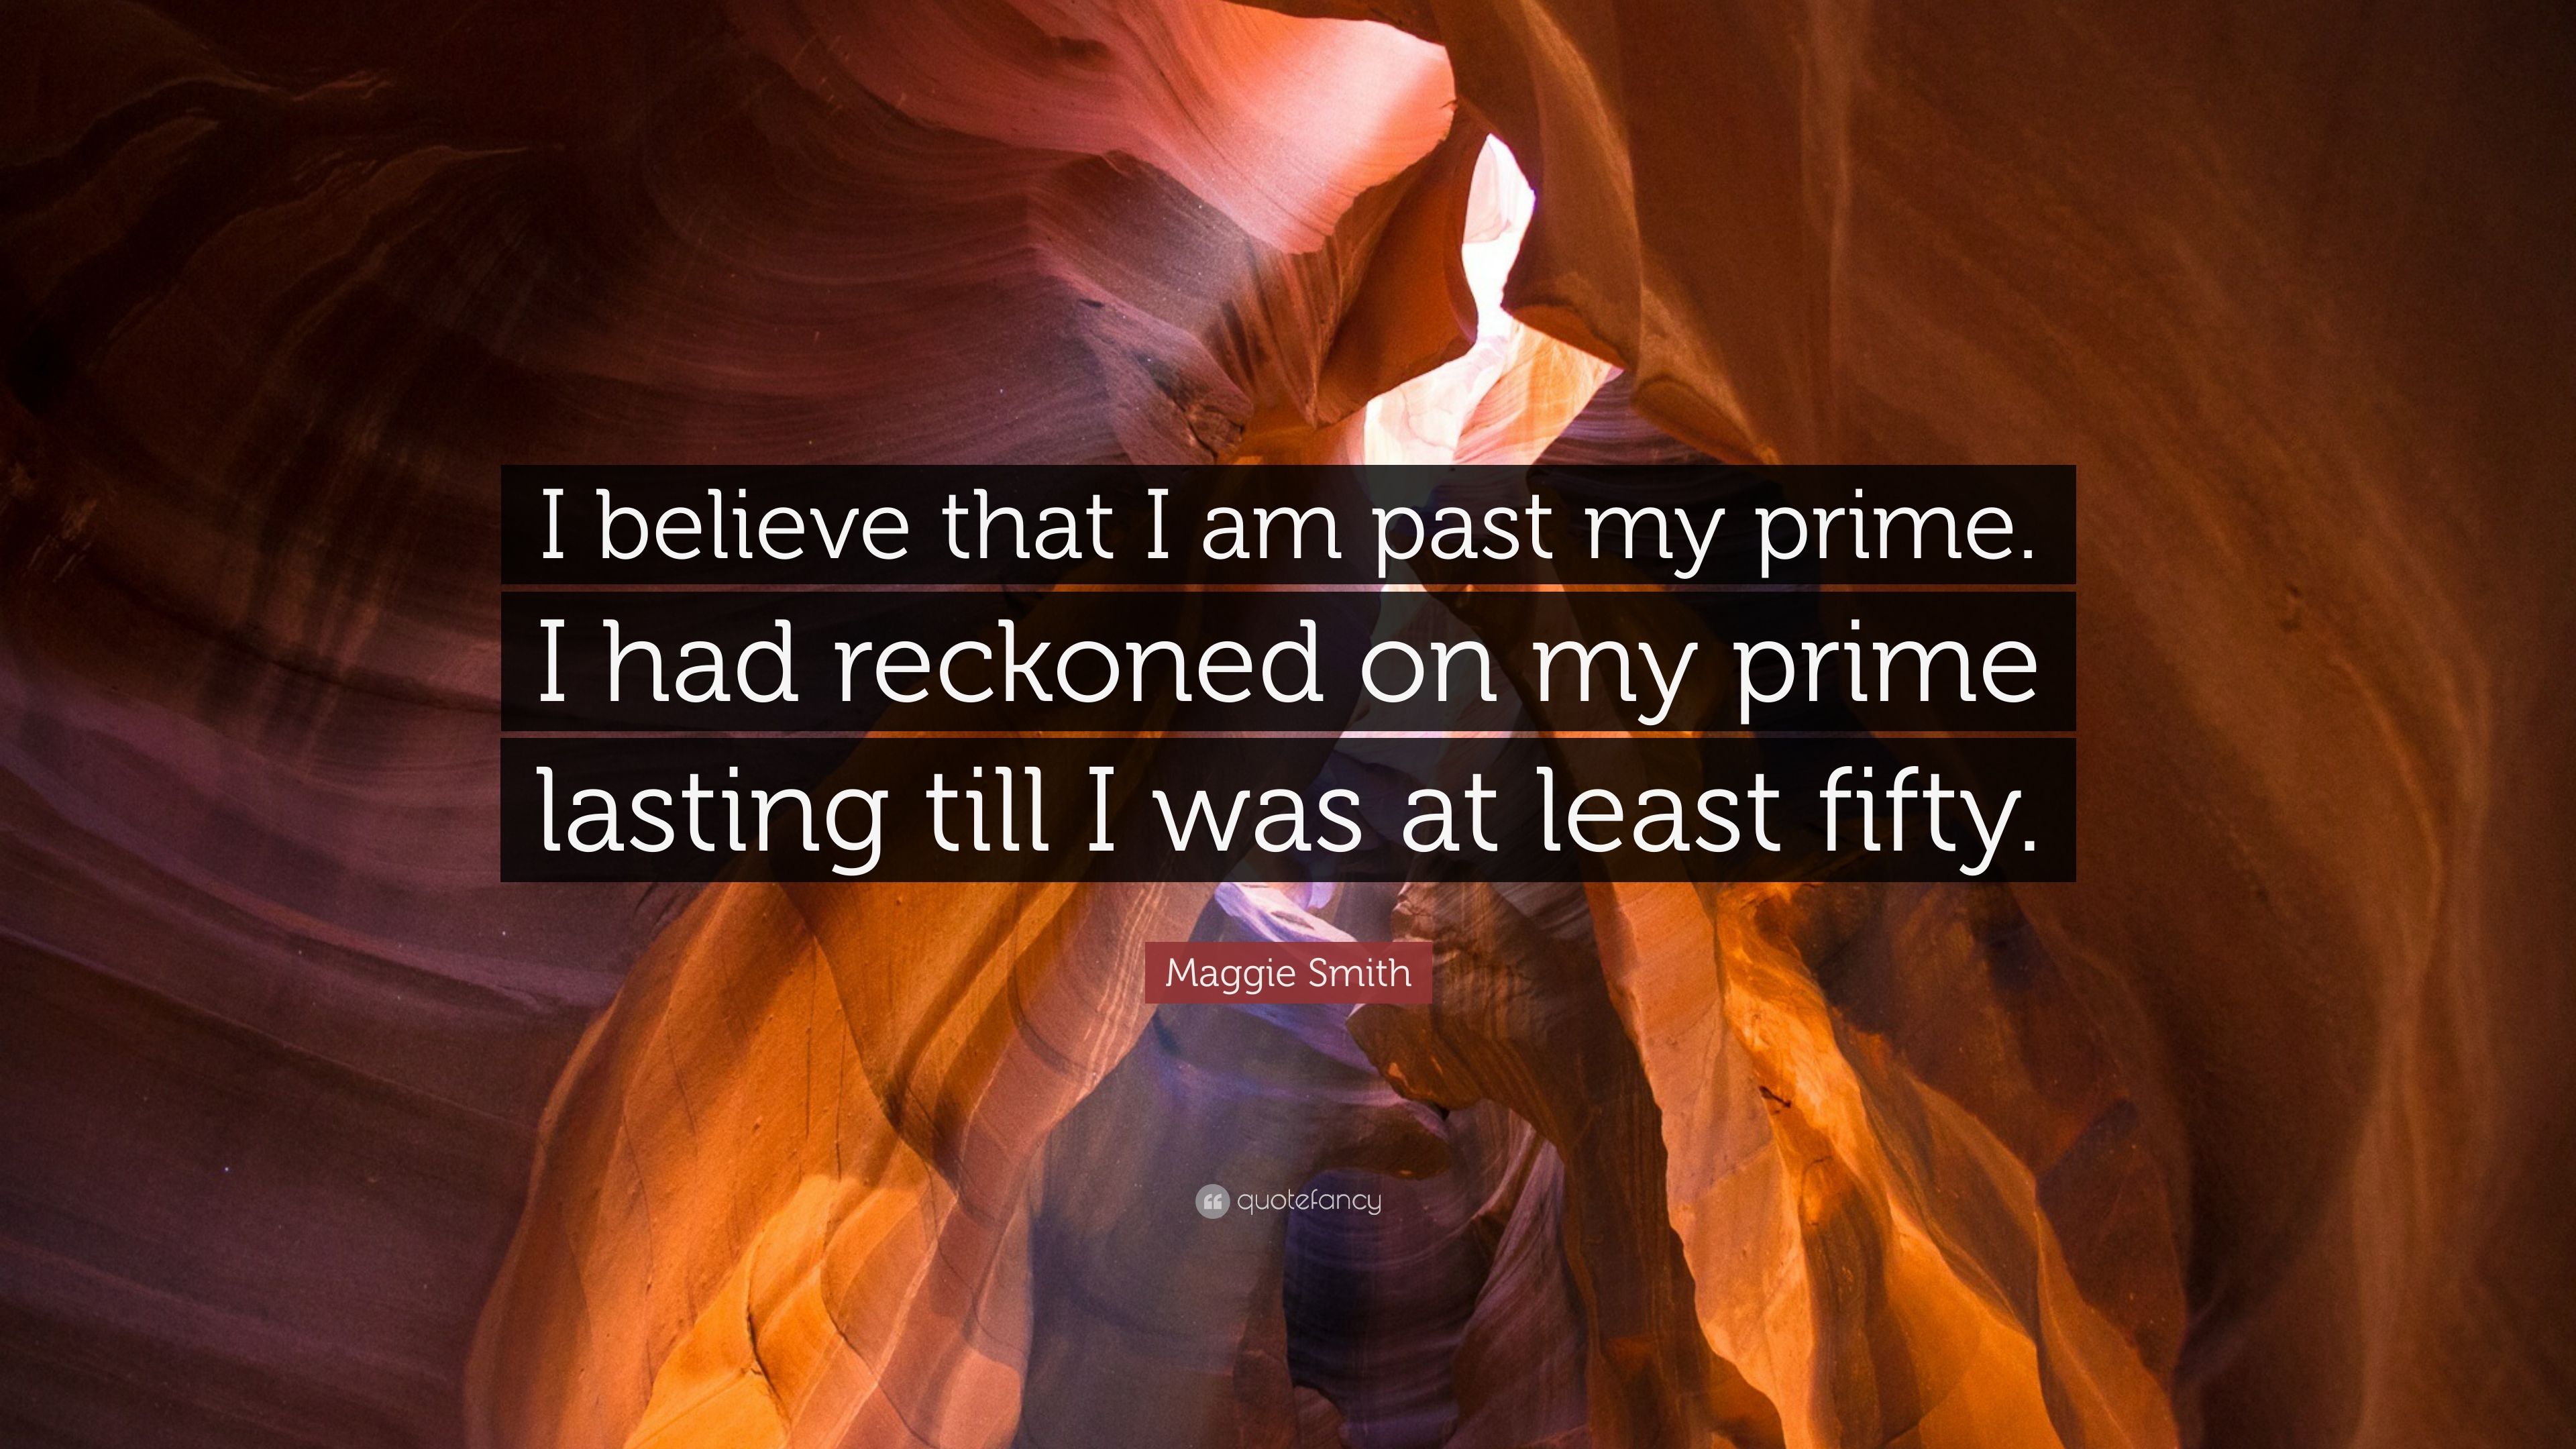 Maggie Smith Quote: “I believe that I am past my prime. I had